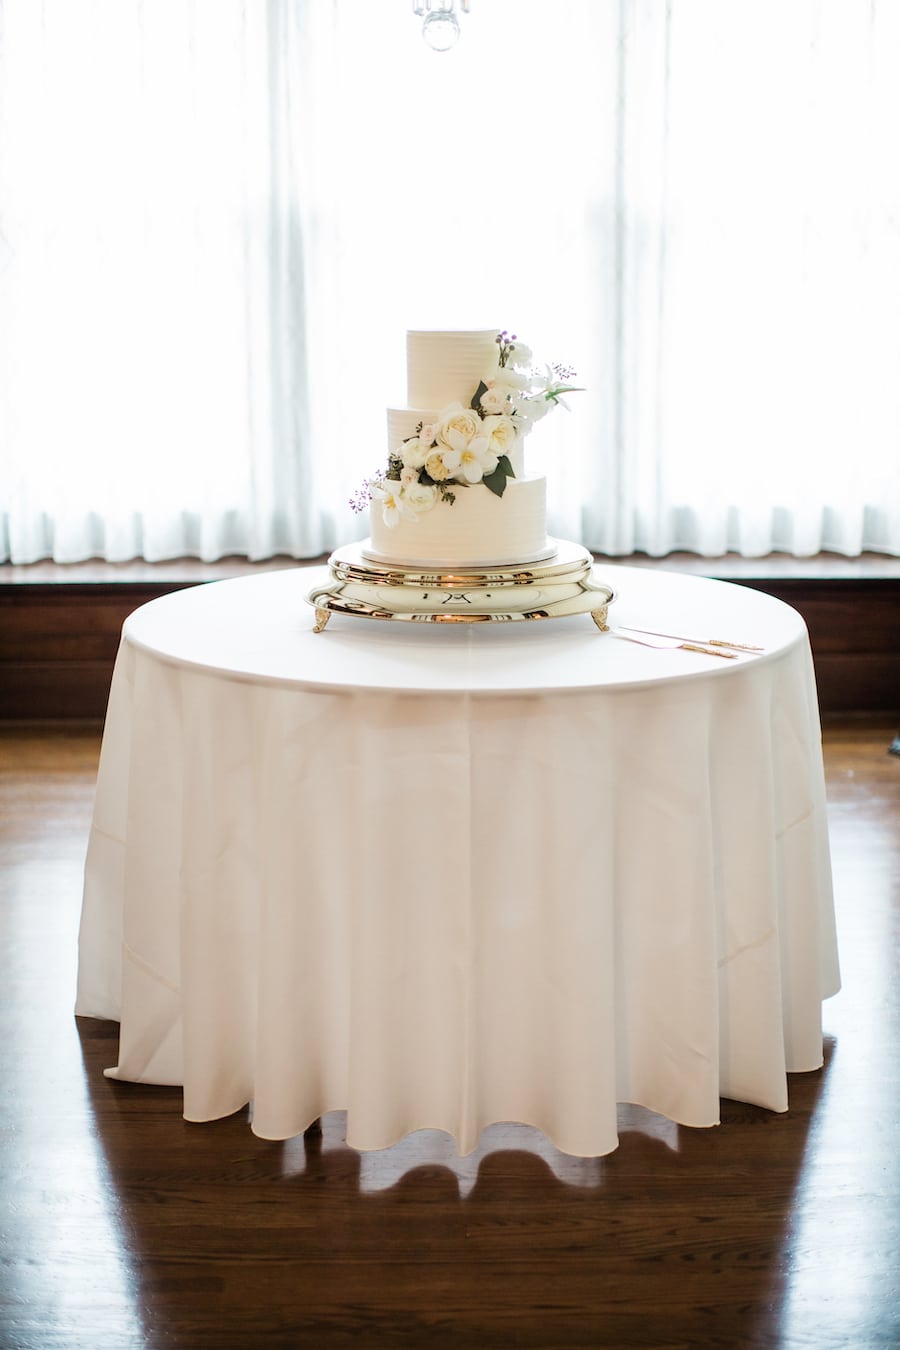 Simple but elegant wedding cake with buttercream icing and fresh flowers and greenery at garden wedding venue CJ’s Off the Square near Nashville, TN.